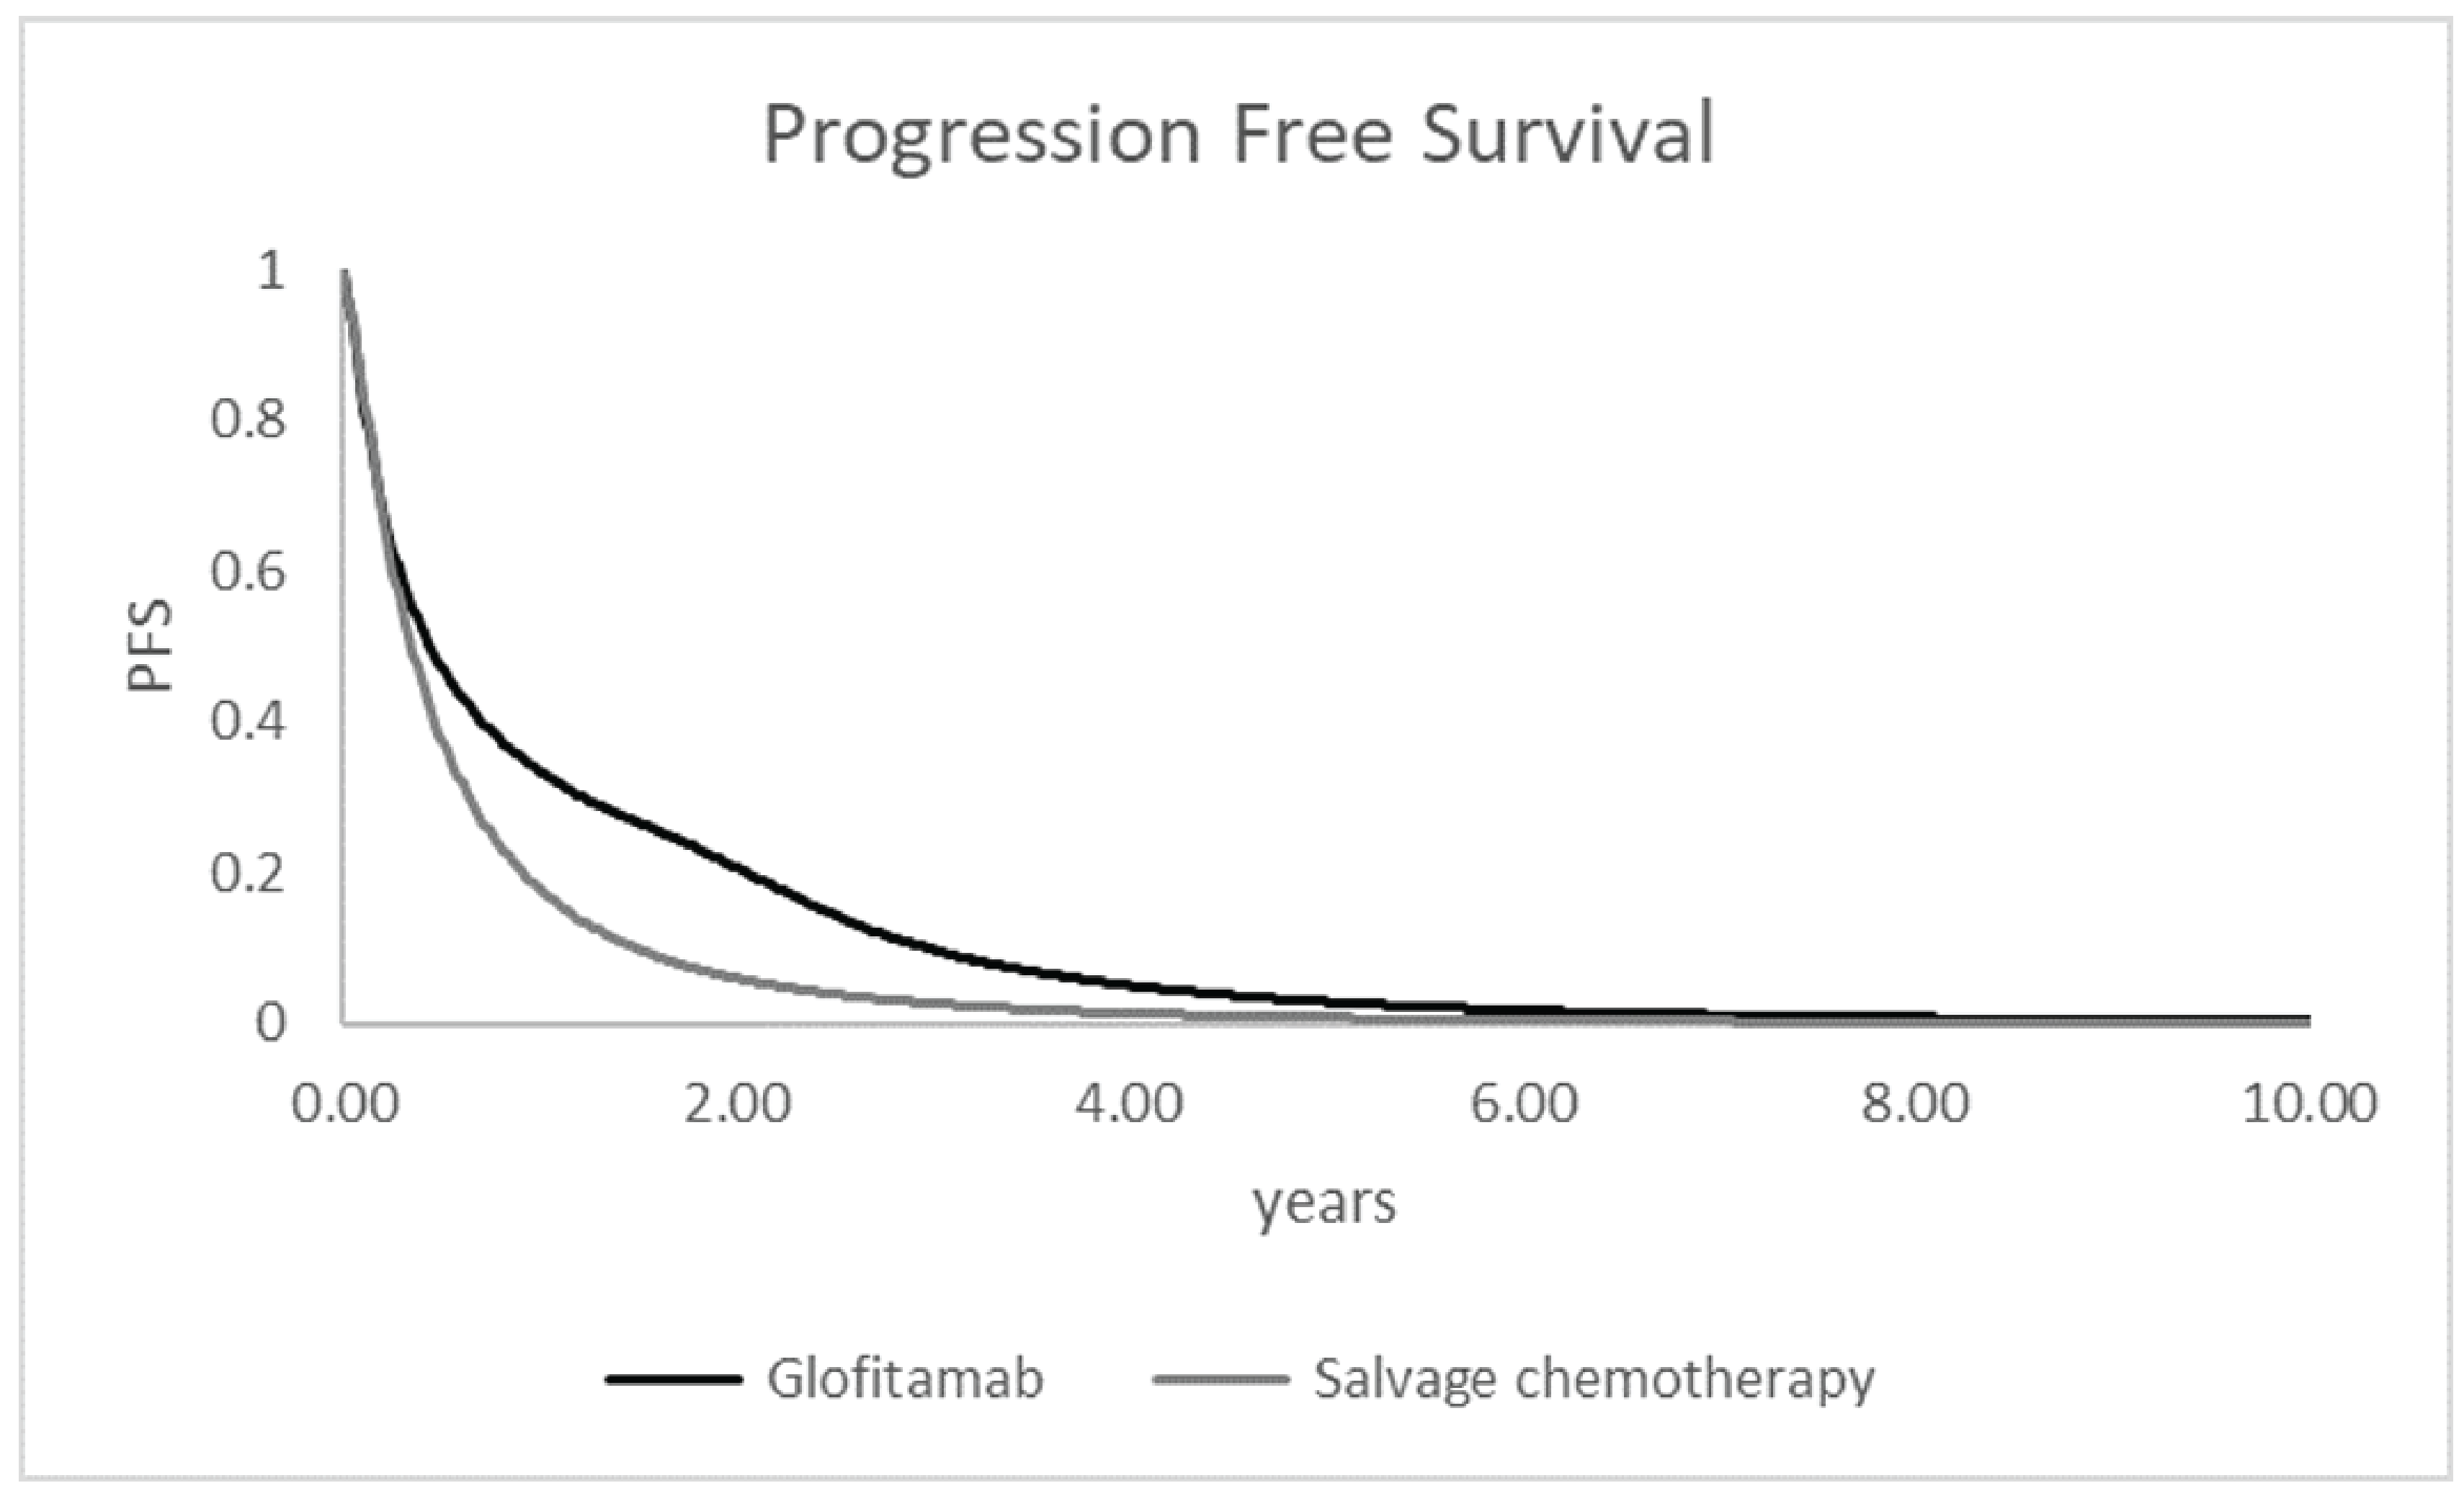 This figure depicts the progression-free survival curves of glofitamab and salvage chemotherapy based on the CADTH reanalysis, in which the glofitamab curve shows a benefit over salvage chemotherapy initially, but the curve gets closer to salvage chemotherapy over time.